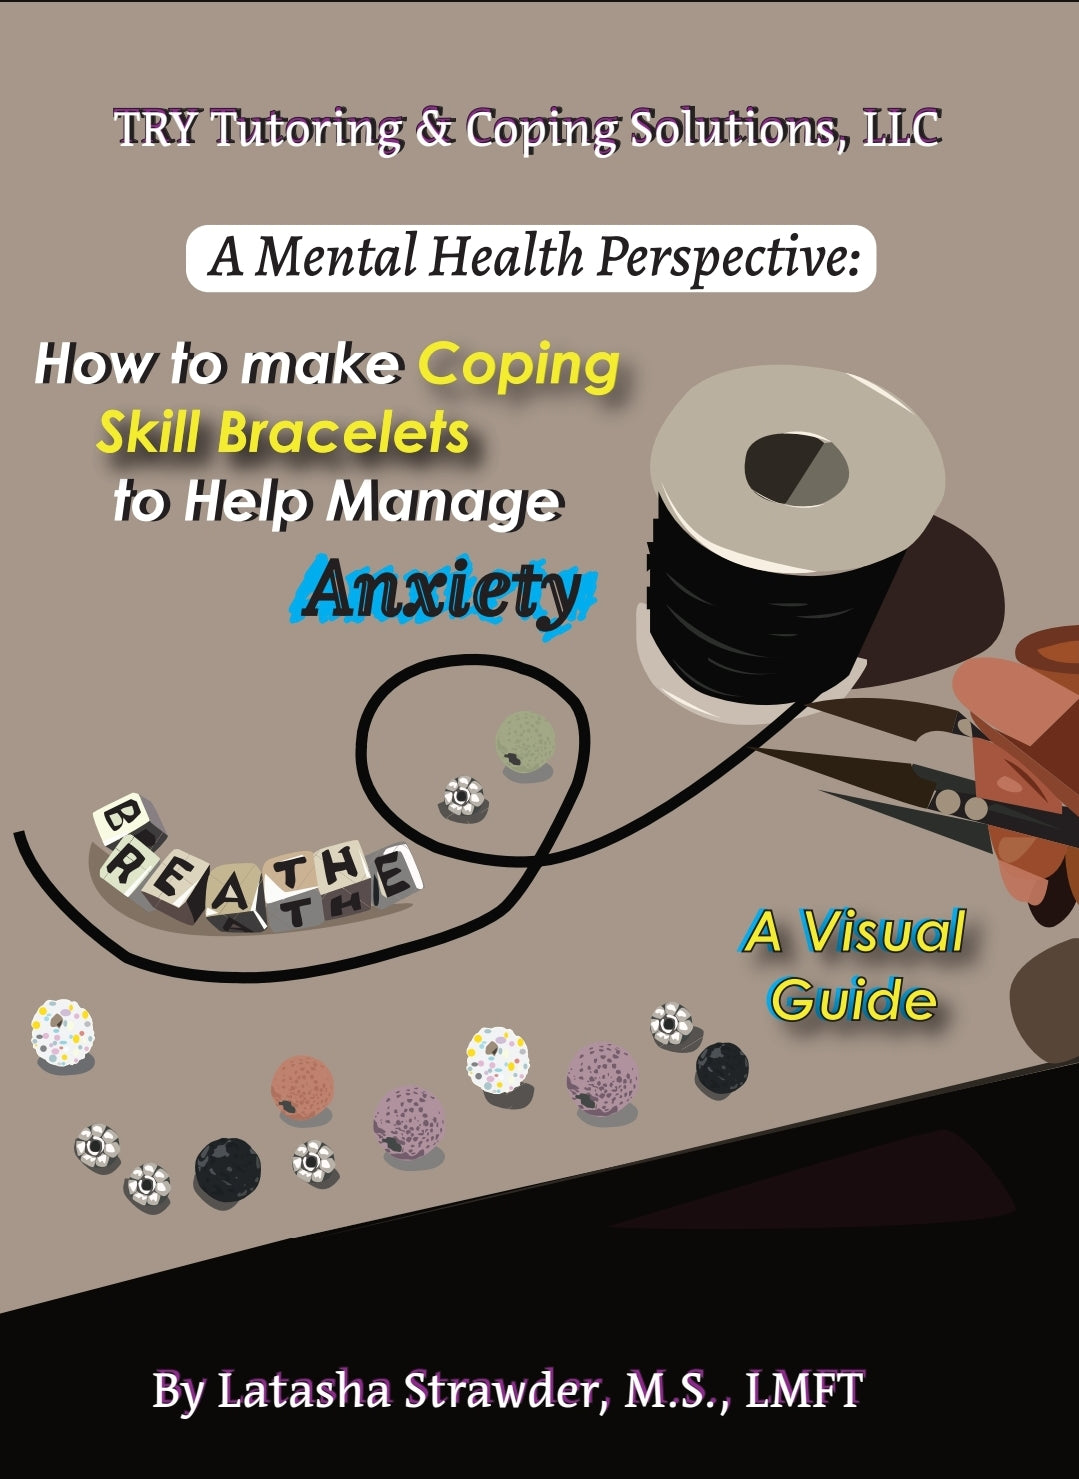 A Mental Health Perspective: How to Make Coping Skill Bracelets to Help Manage Anxiety - A Visual Guide